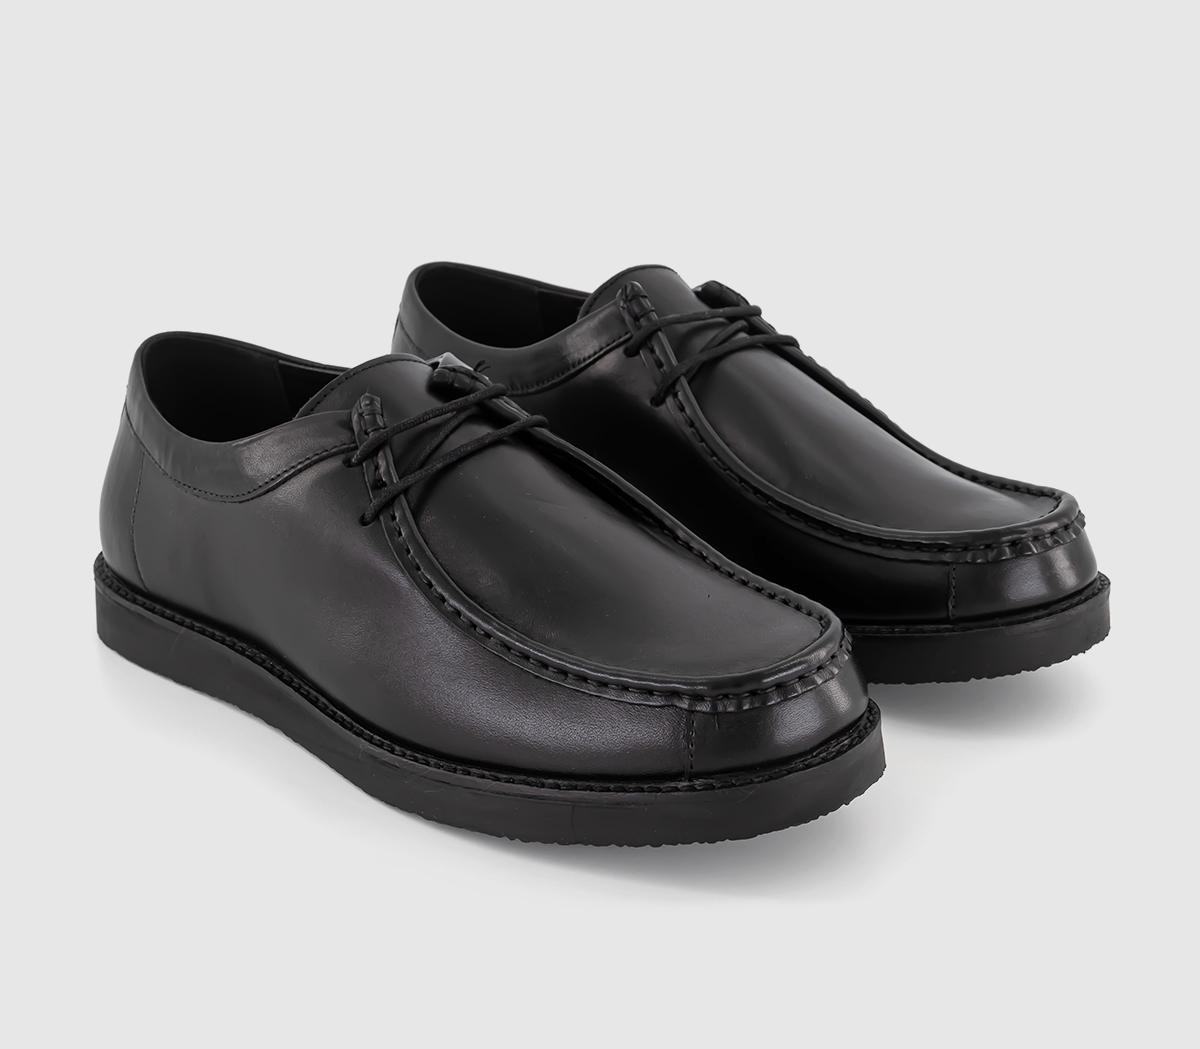 OFFICE Chelmsford Stitch Apron Shoes Black Leather, 10